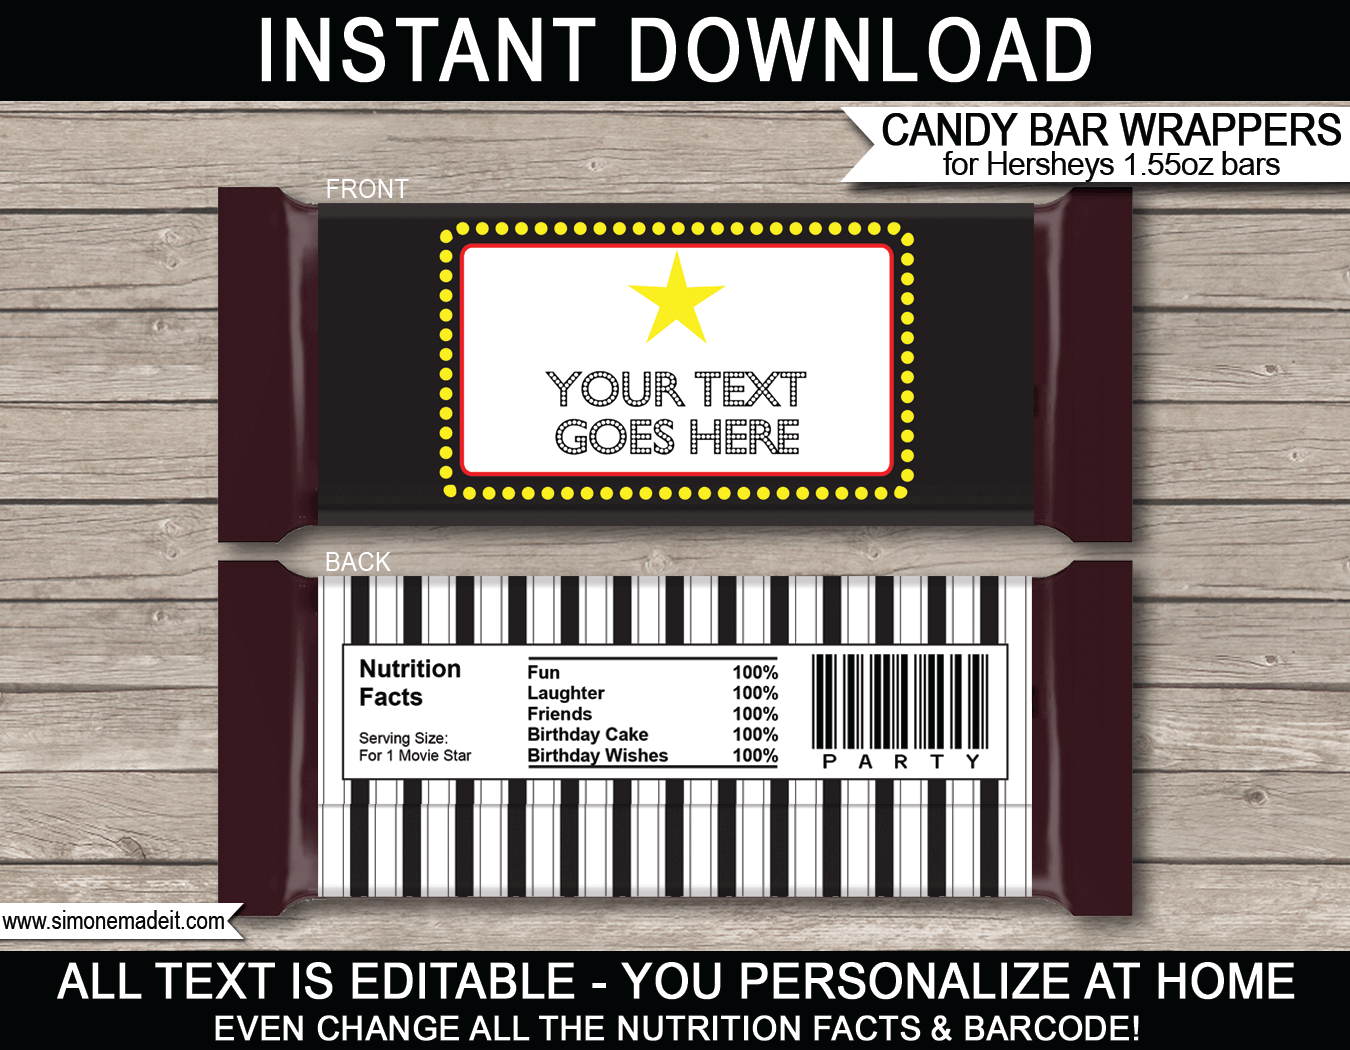 Movie Hershey Candy Bar Wrappers | Movie Night | Birthday Party Favors | Personalized Candy Bars | Editable Template | INSTANT DOWNLOAD $3.00 via simonemadeit.com